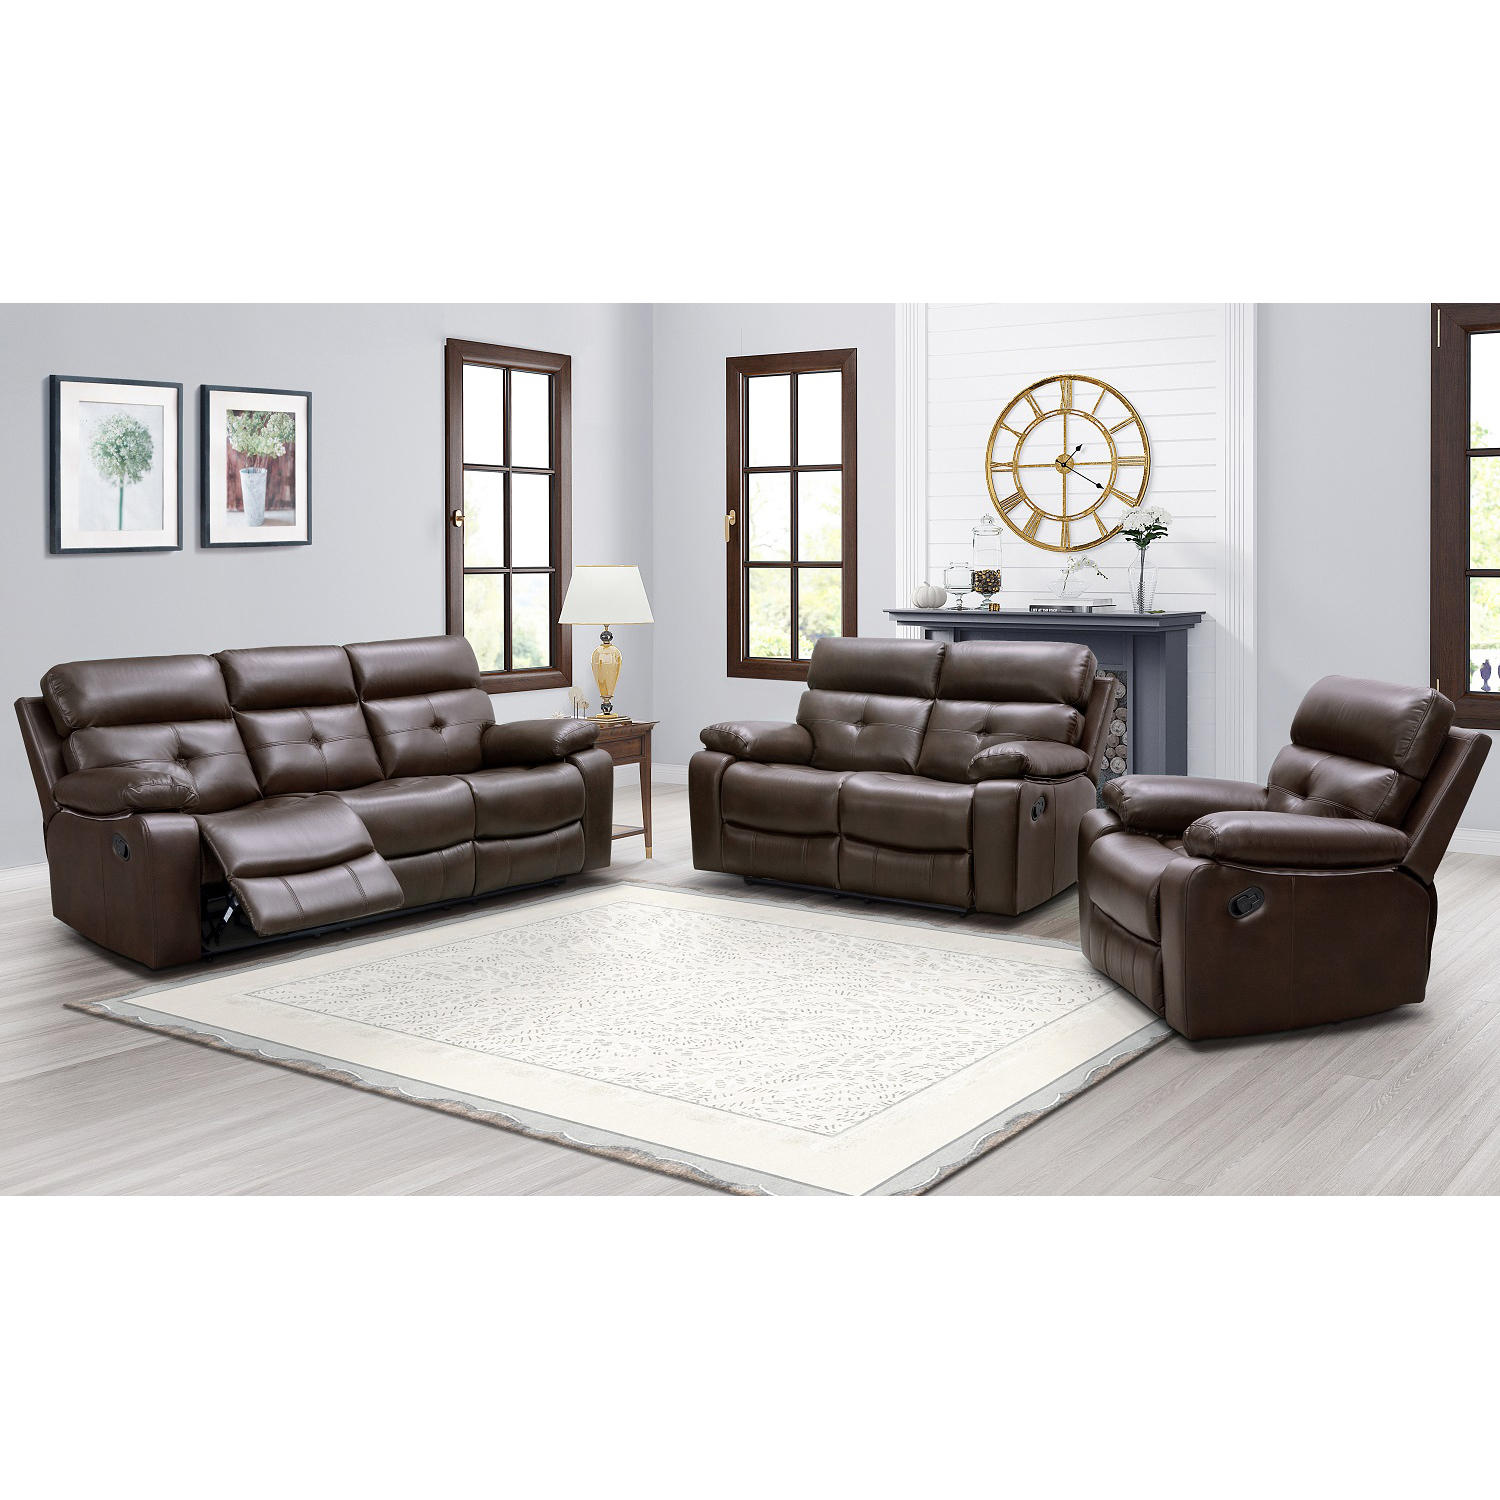 Augusta 3-Piece Reclining Sofa, Loveseat and Chair Set